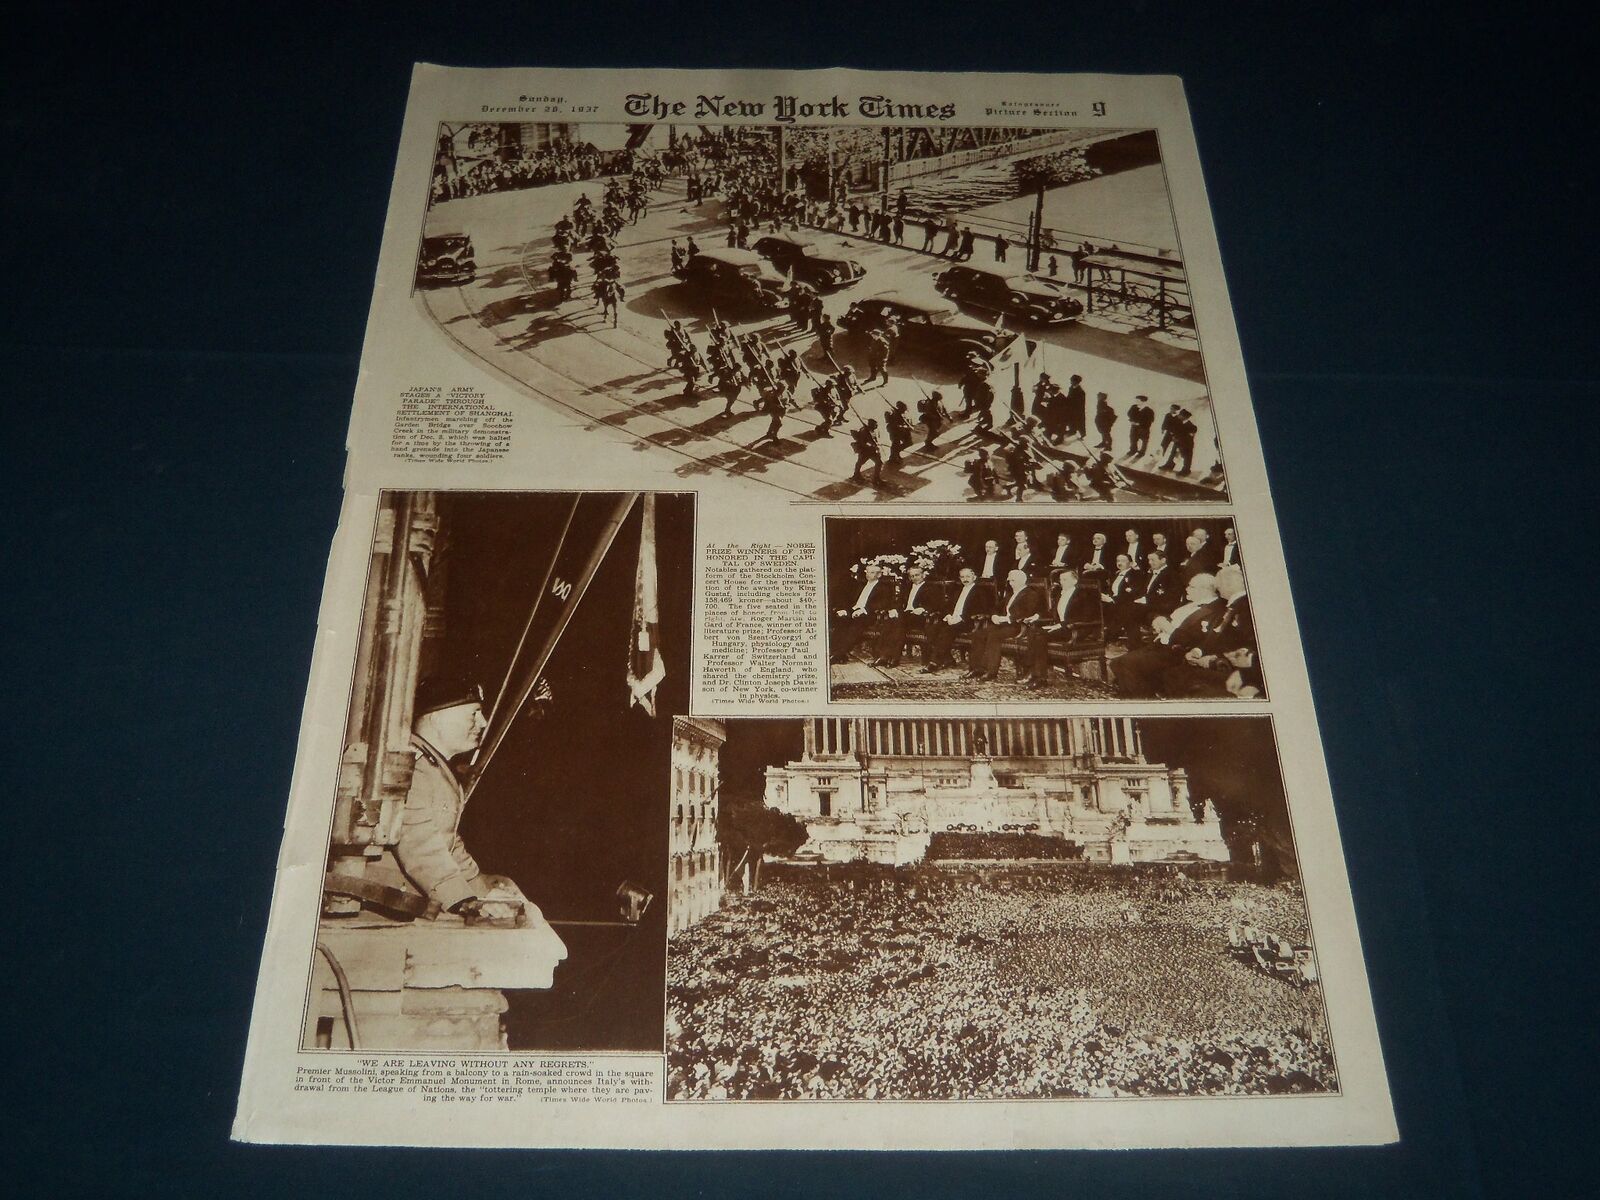 1937 DECEMBER 26 NEW YORK TIMES PICTURE SECTION - NOBEL PRIZE WINNERS - NT 7354